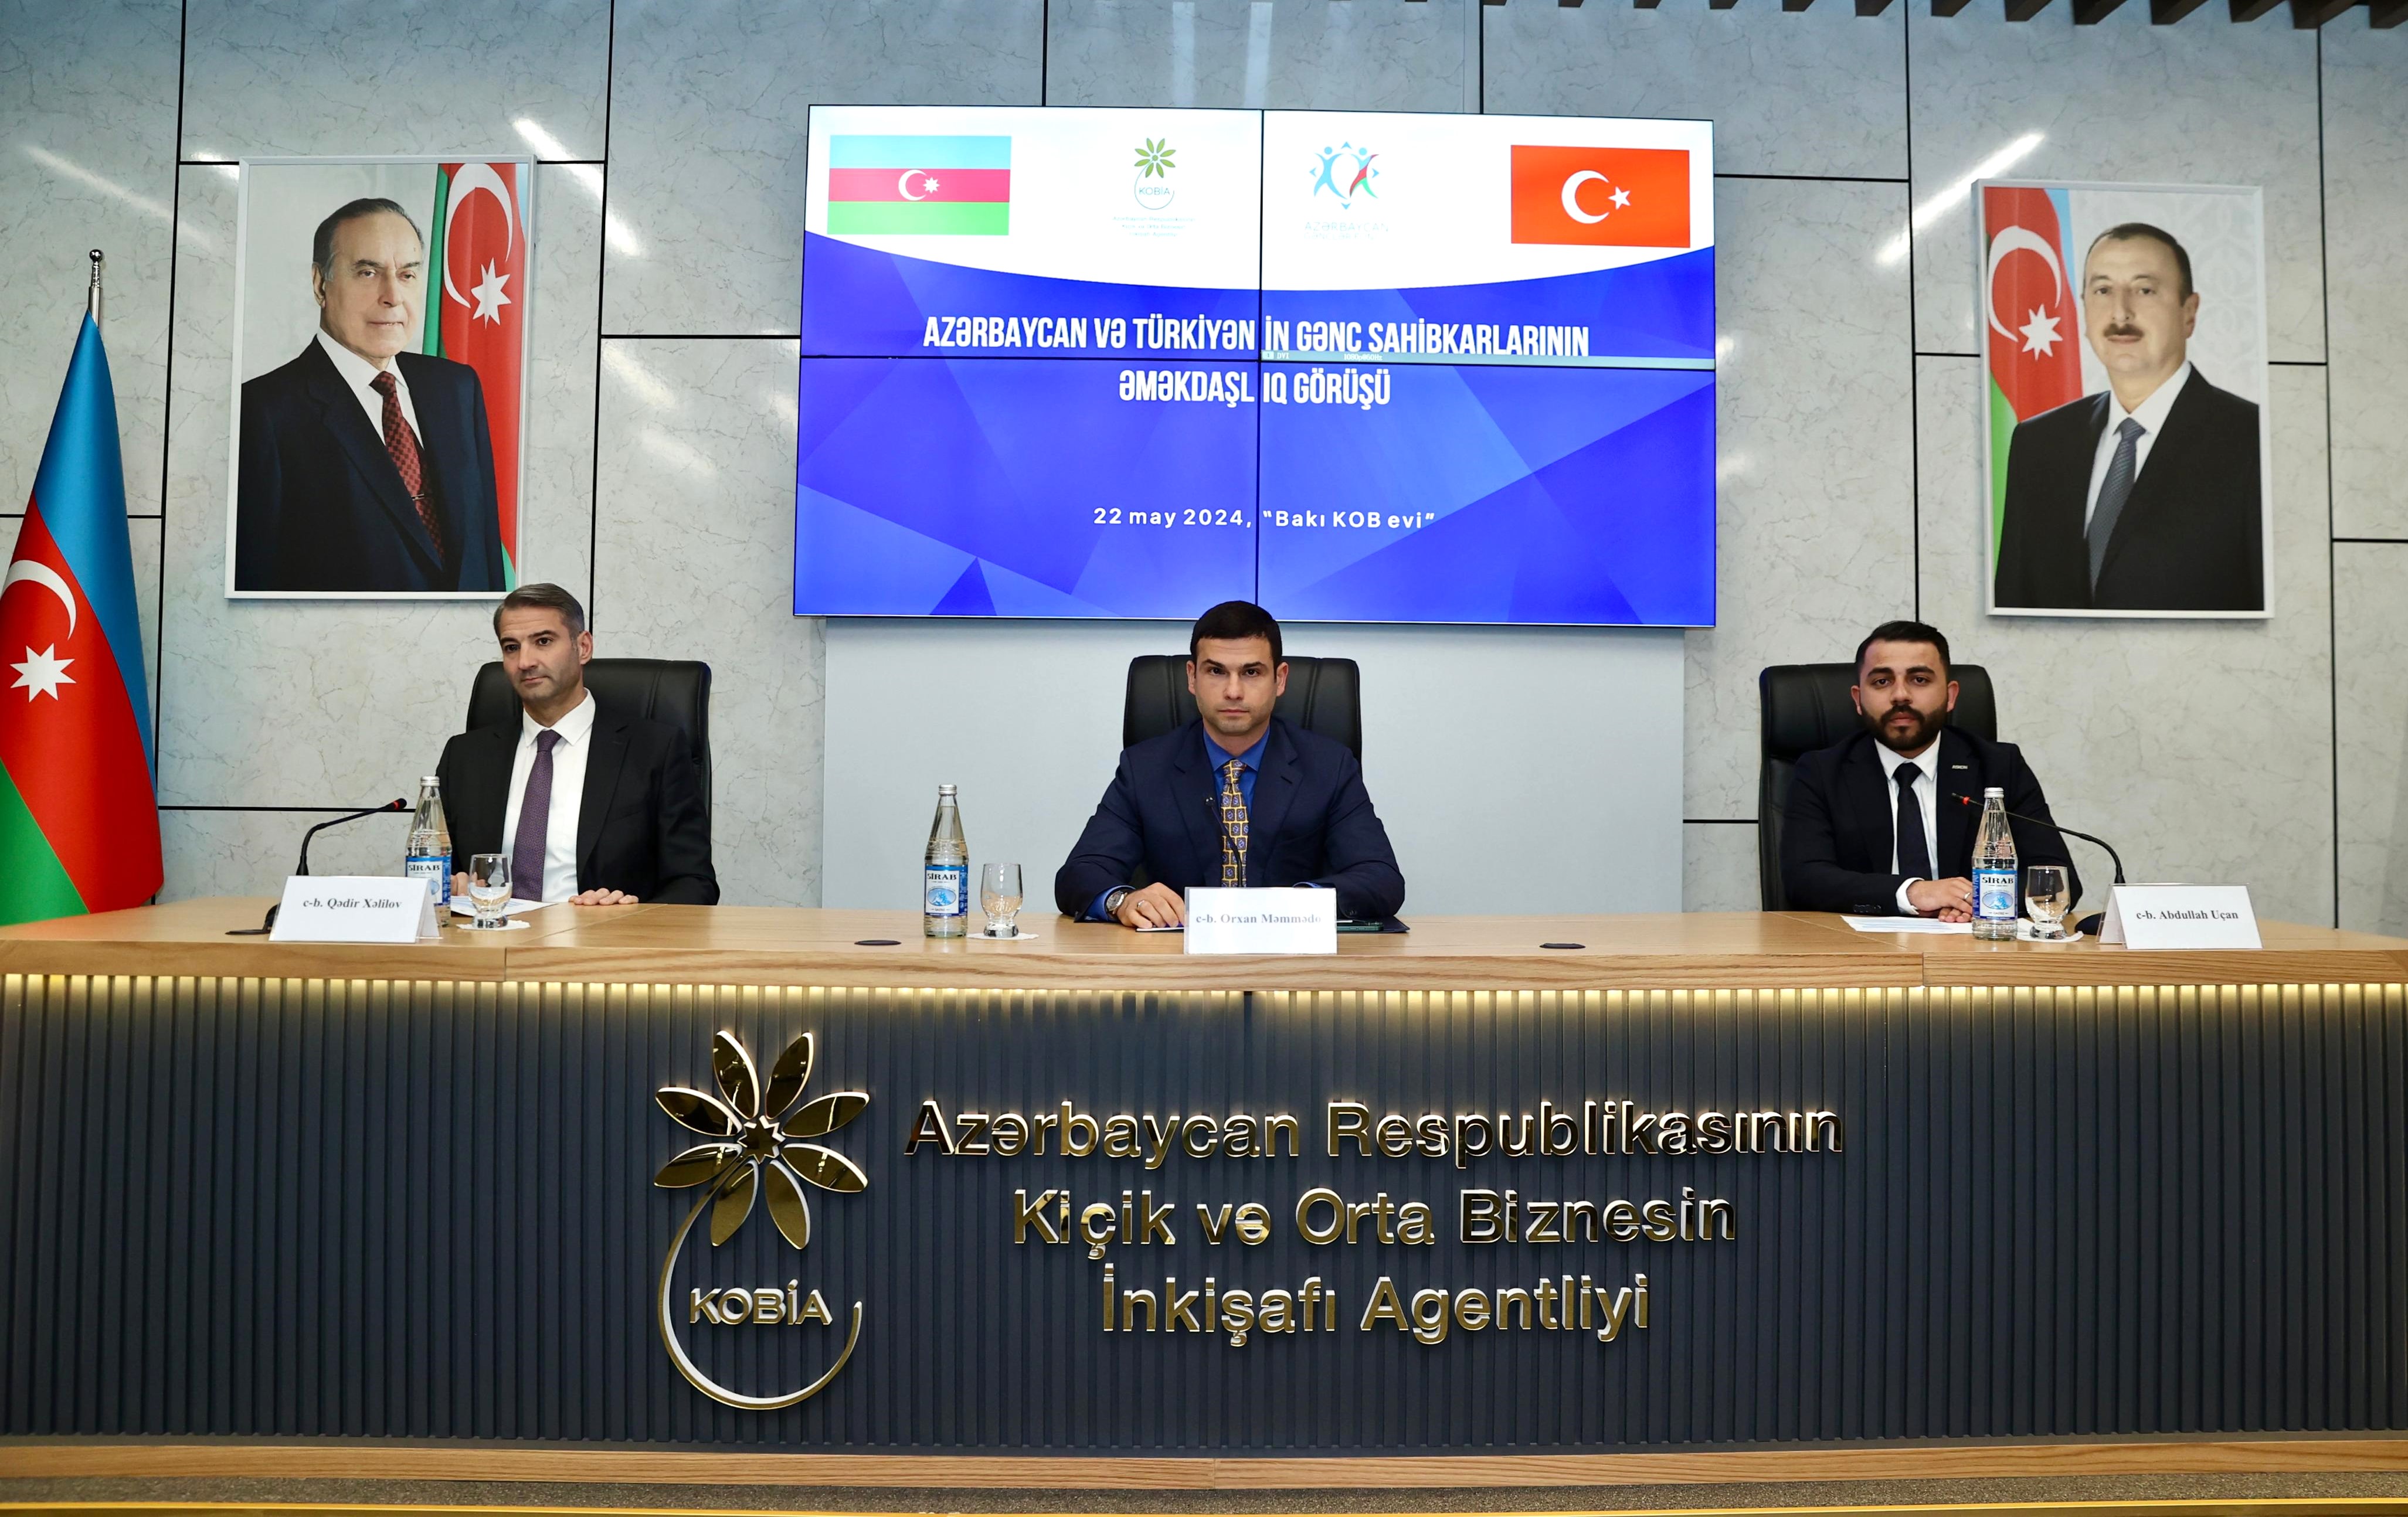 A meeting of young entrepreneurs of Azerbaijan and Turkey took place 